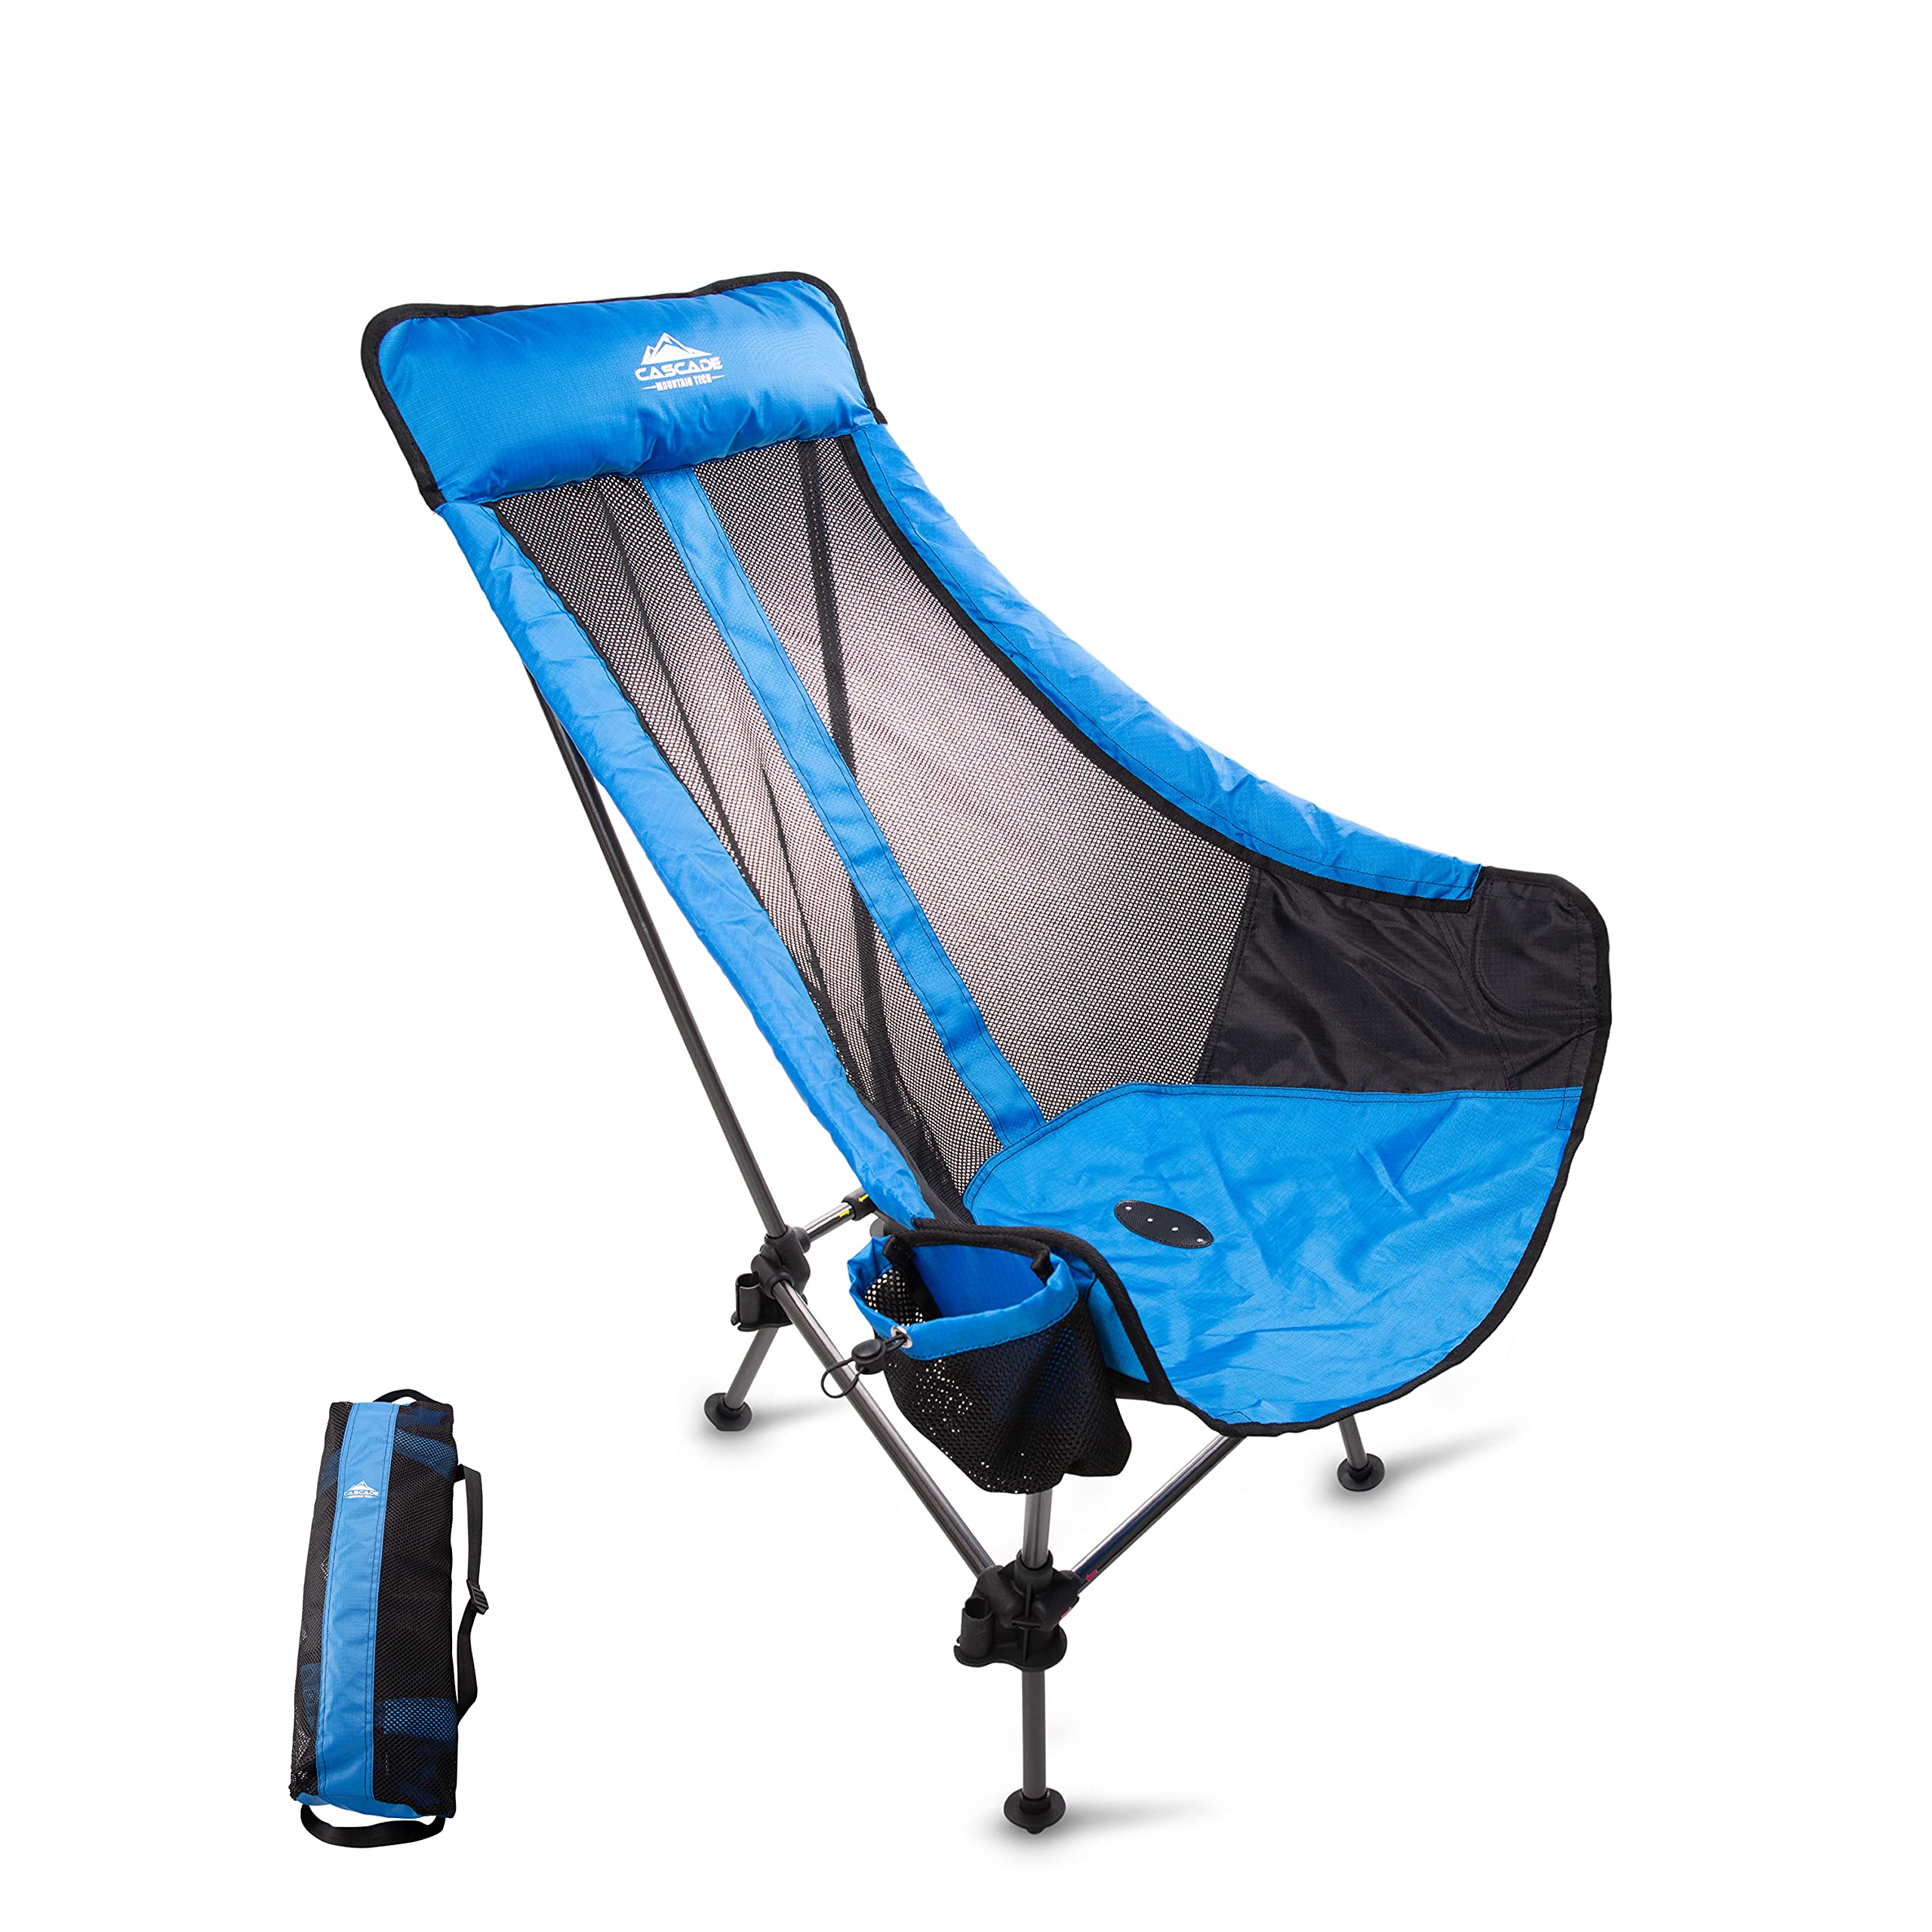 Cascade Mountain Tech Hammock Camp Chair with Adjustable Height - Ultralight for Backpacking, Camping, Sporting Events, Beach, and Picnics with Carry Bag - Royal Blue